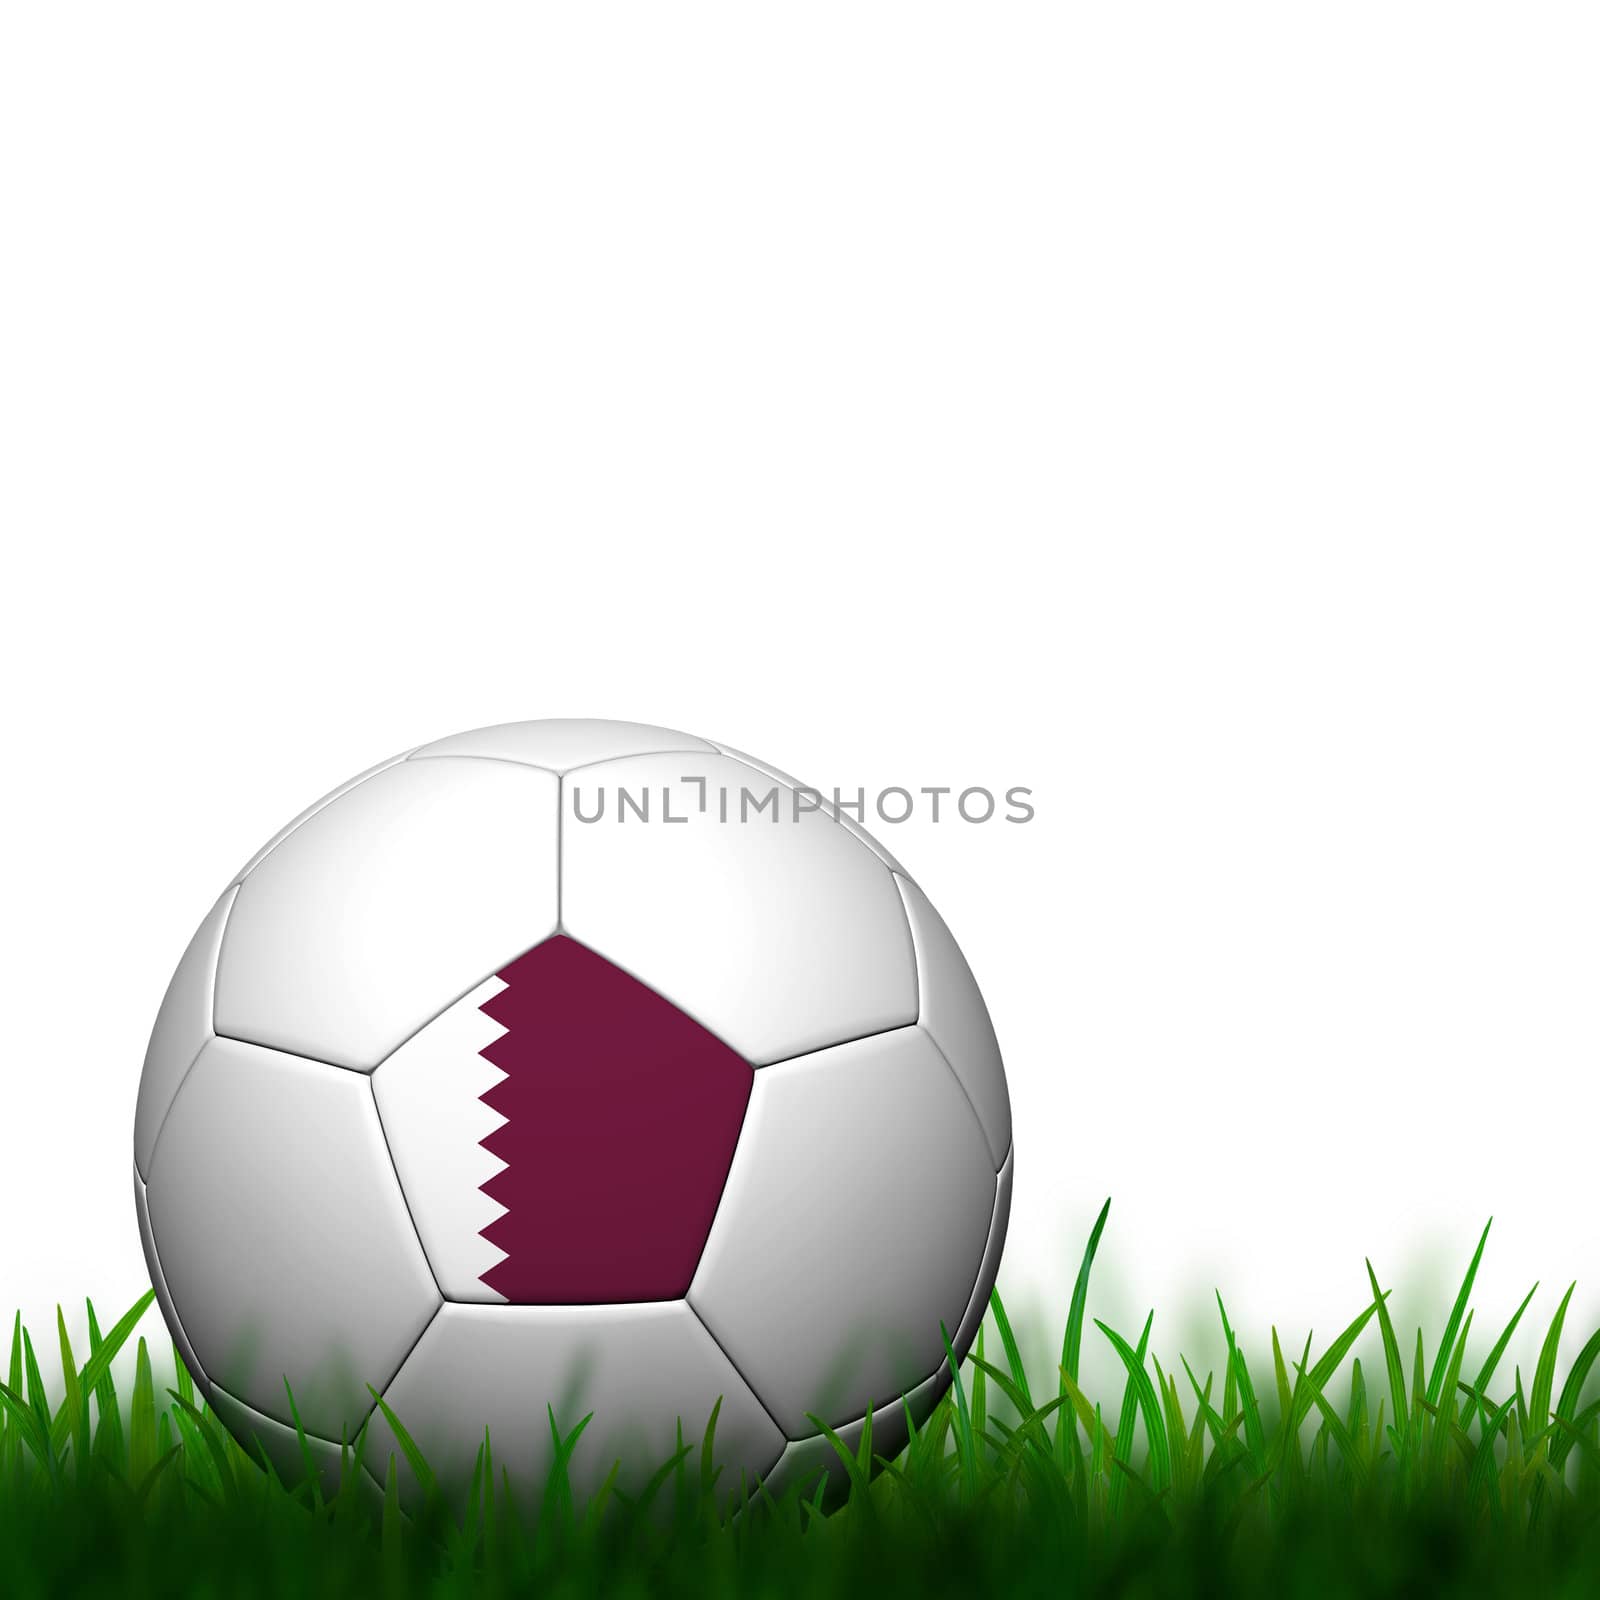 3D Football Qatar Flag Patter in green grass on white background by jakgree